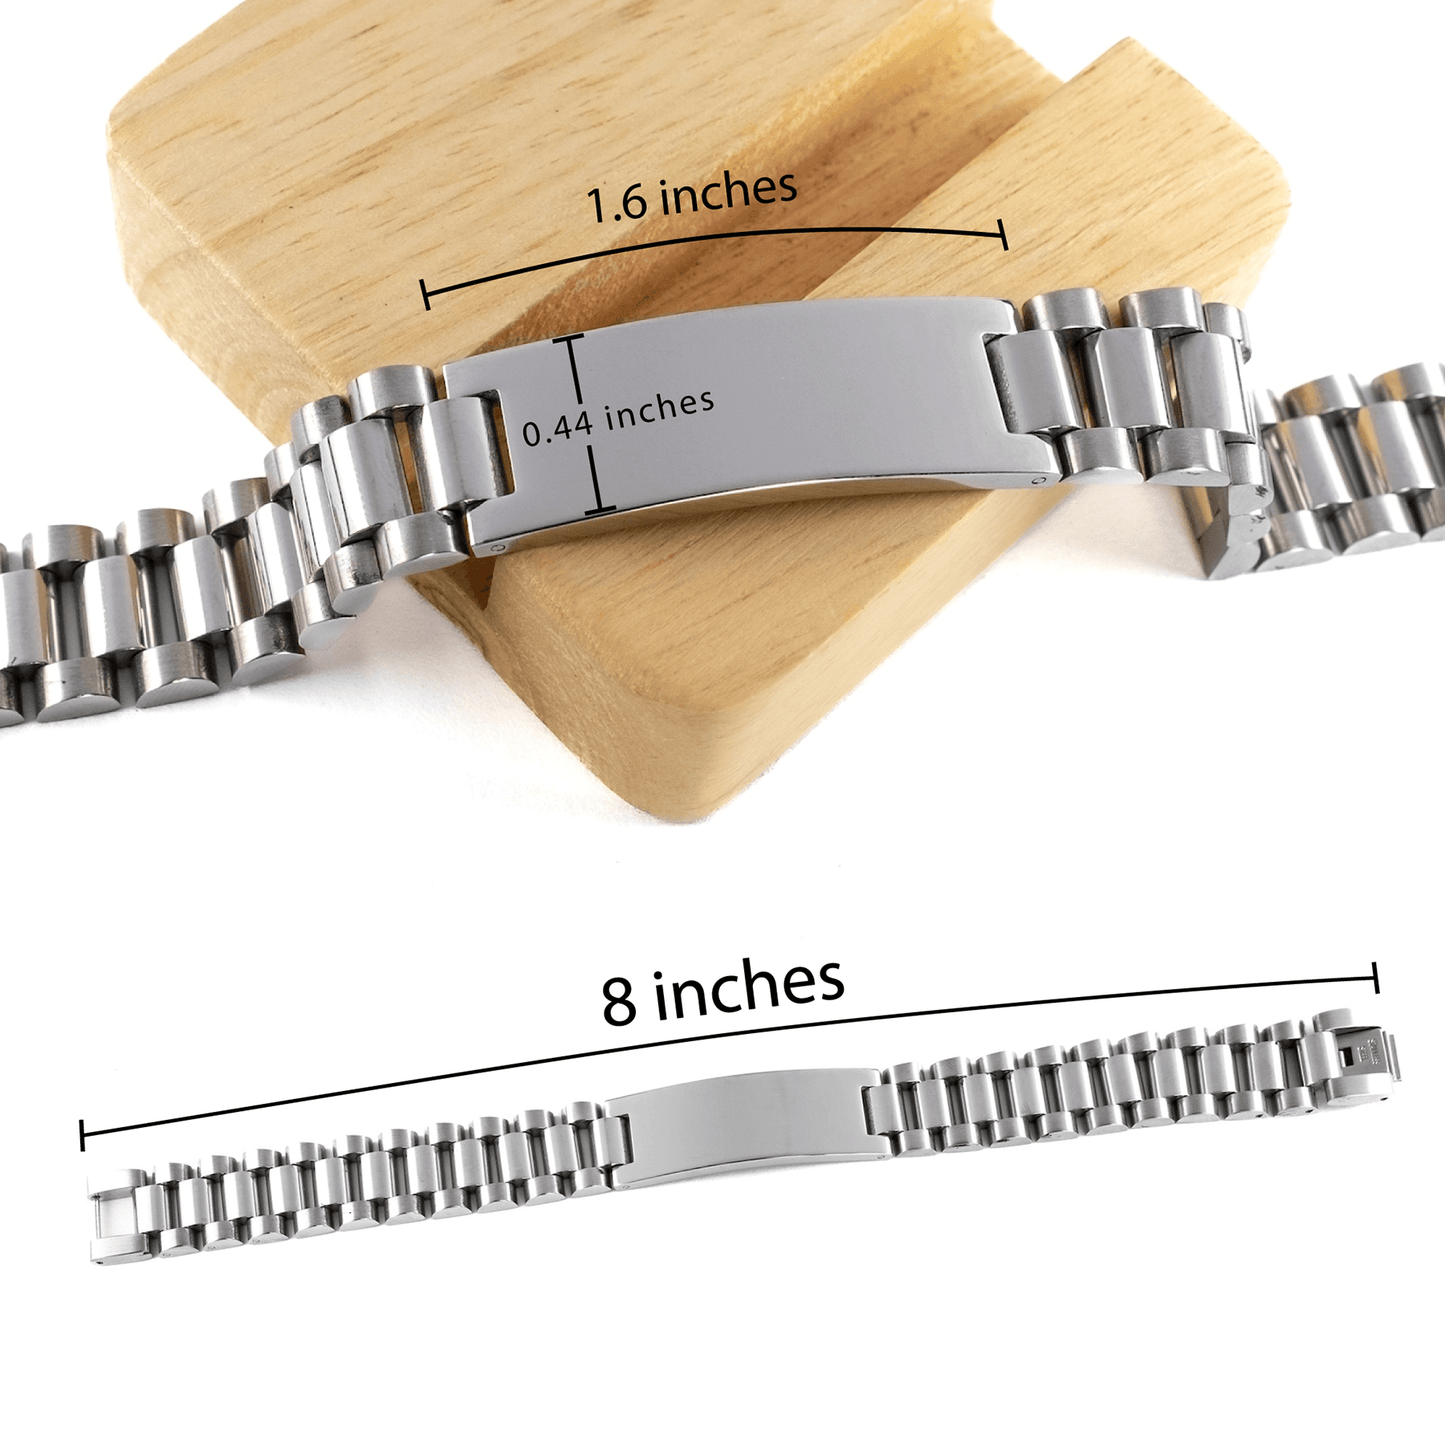 Remarkable Mental Health Counselor Gifts, Your dedication and hard work, Inspirational Birthday Christmas Unique Ladder Stainless Steel Bracelet For Mental Health Counselor, Coworkers, Men, Women, Friends - Mallard Moon Gift Shop